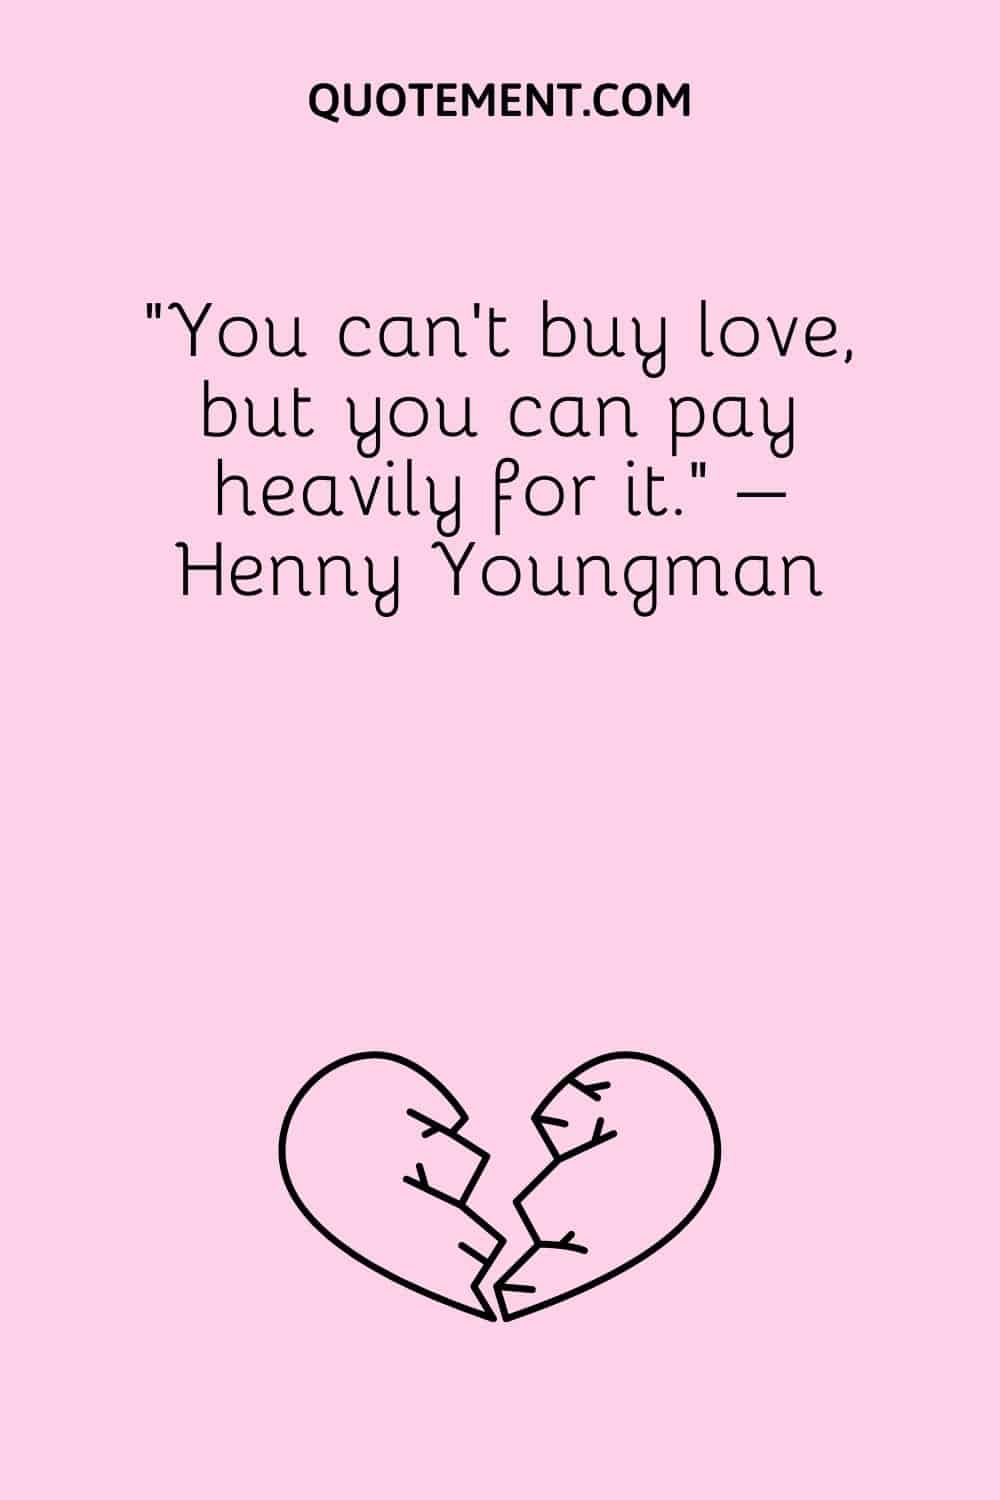 “You can’t buy love, but you can pay heavily for it.” – Henny Youngman